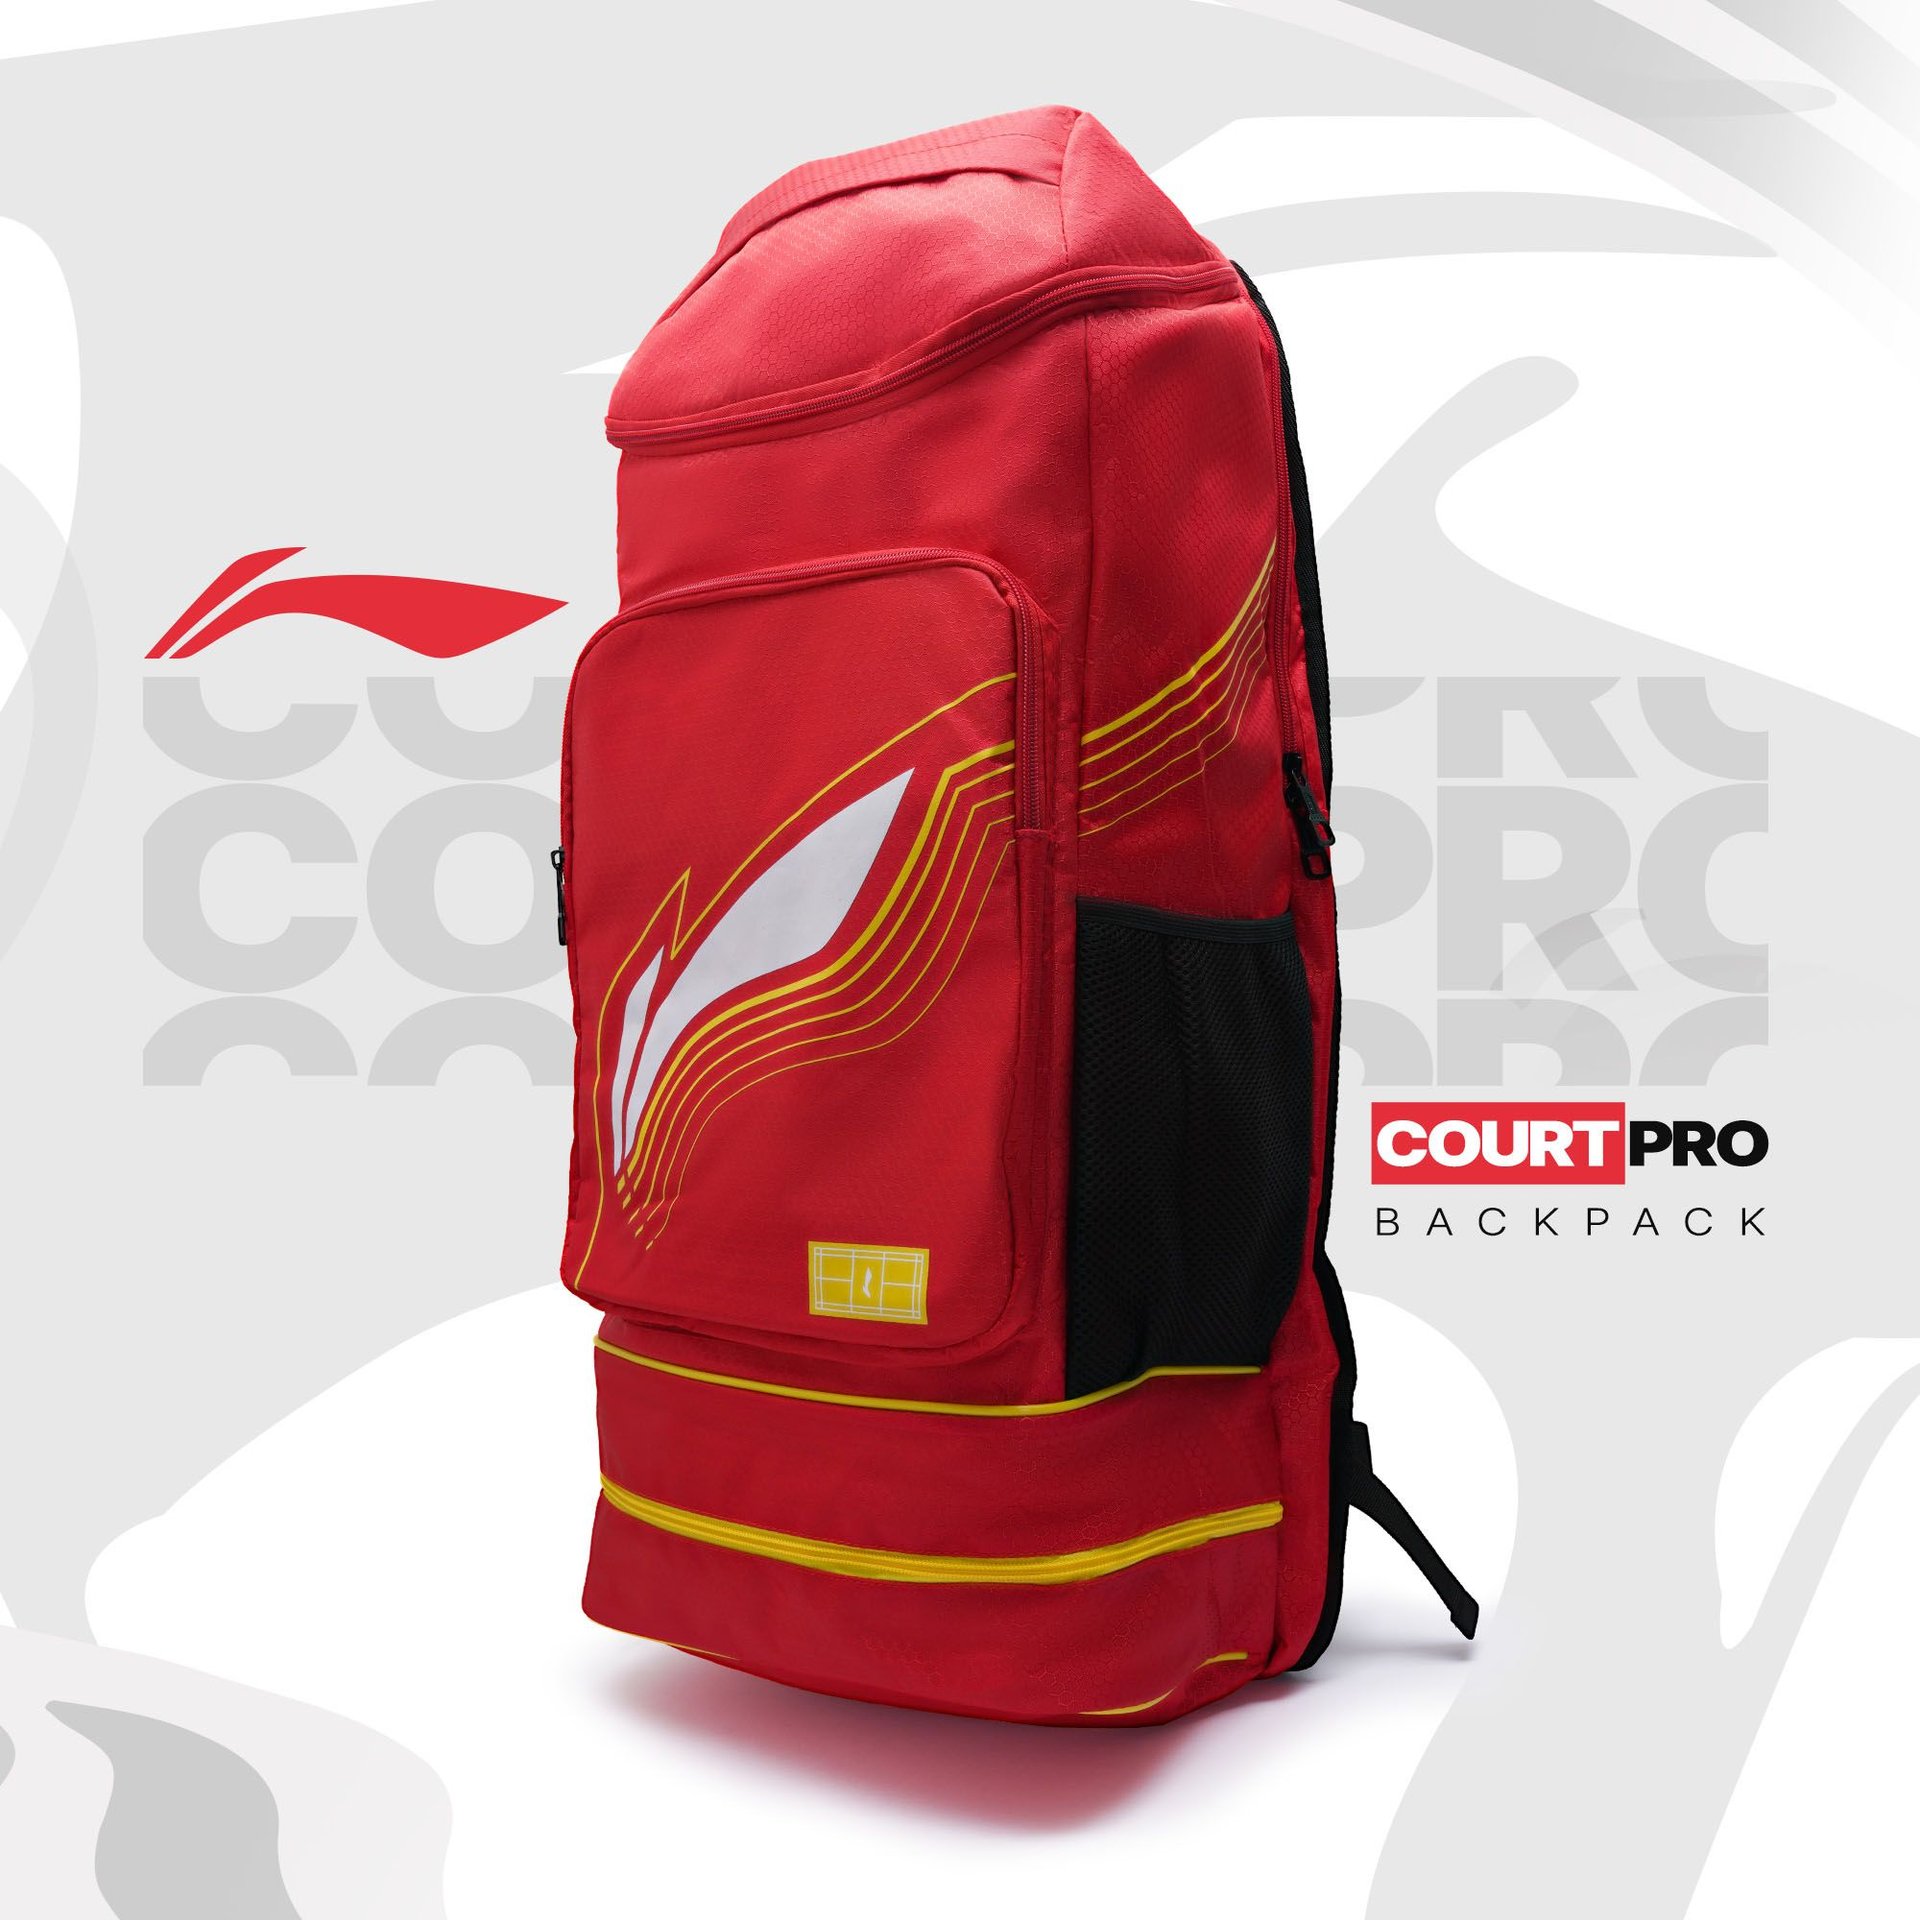 Court Pro Backpack